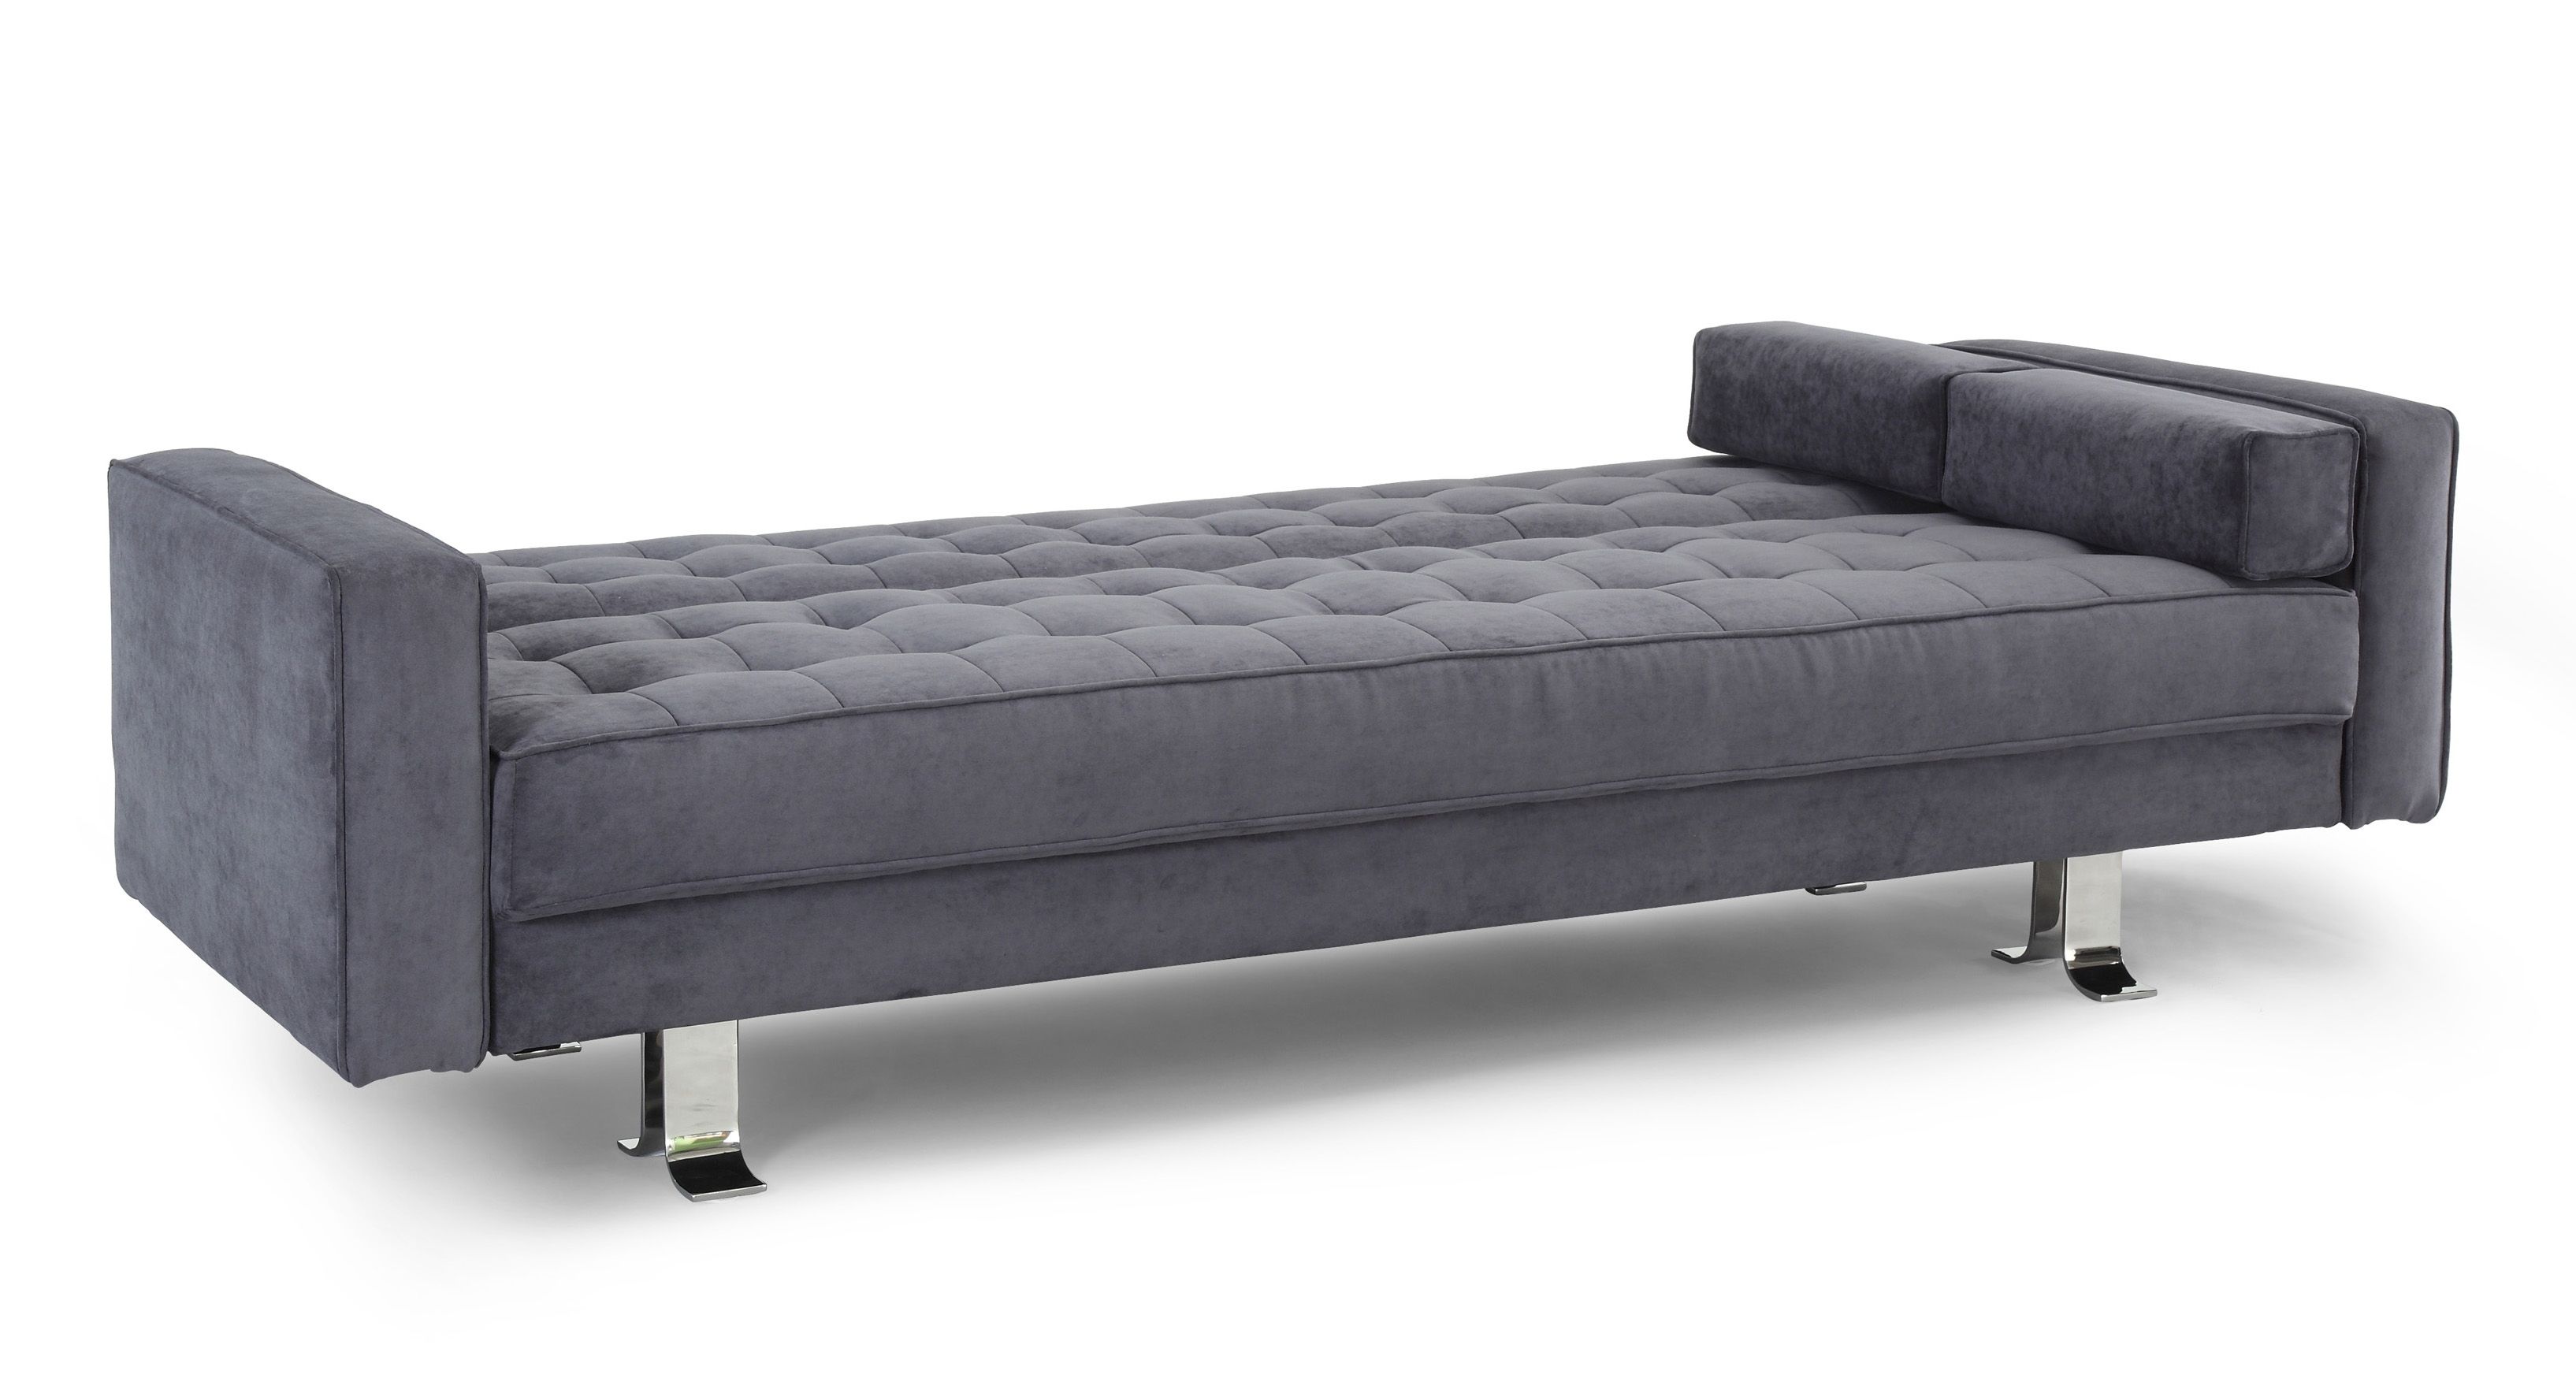 Lifestyle Solutions Rudolpho Convertible Sofa Ga Rup Cc Set Inside Convertible Sofas (View 3 of 10)